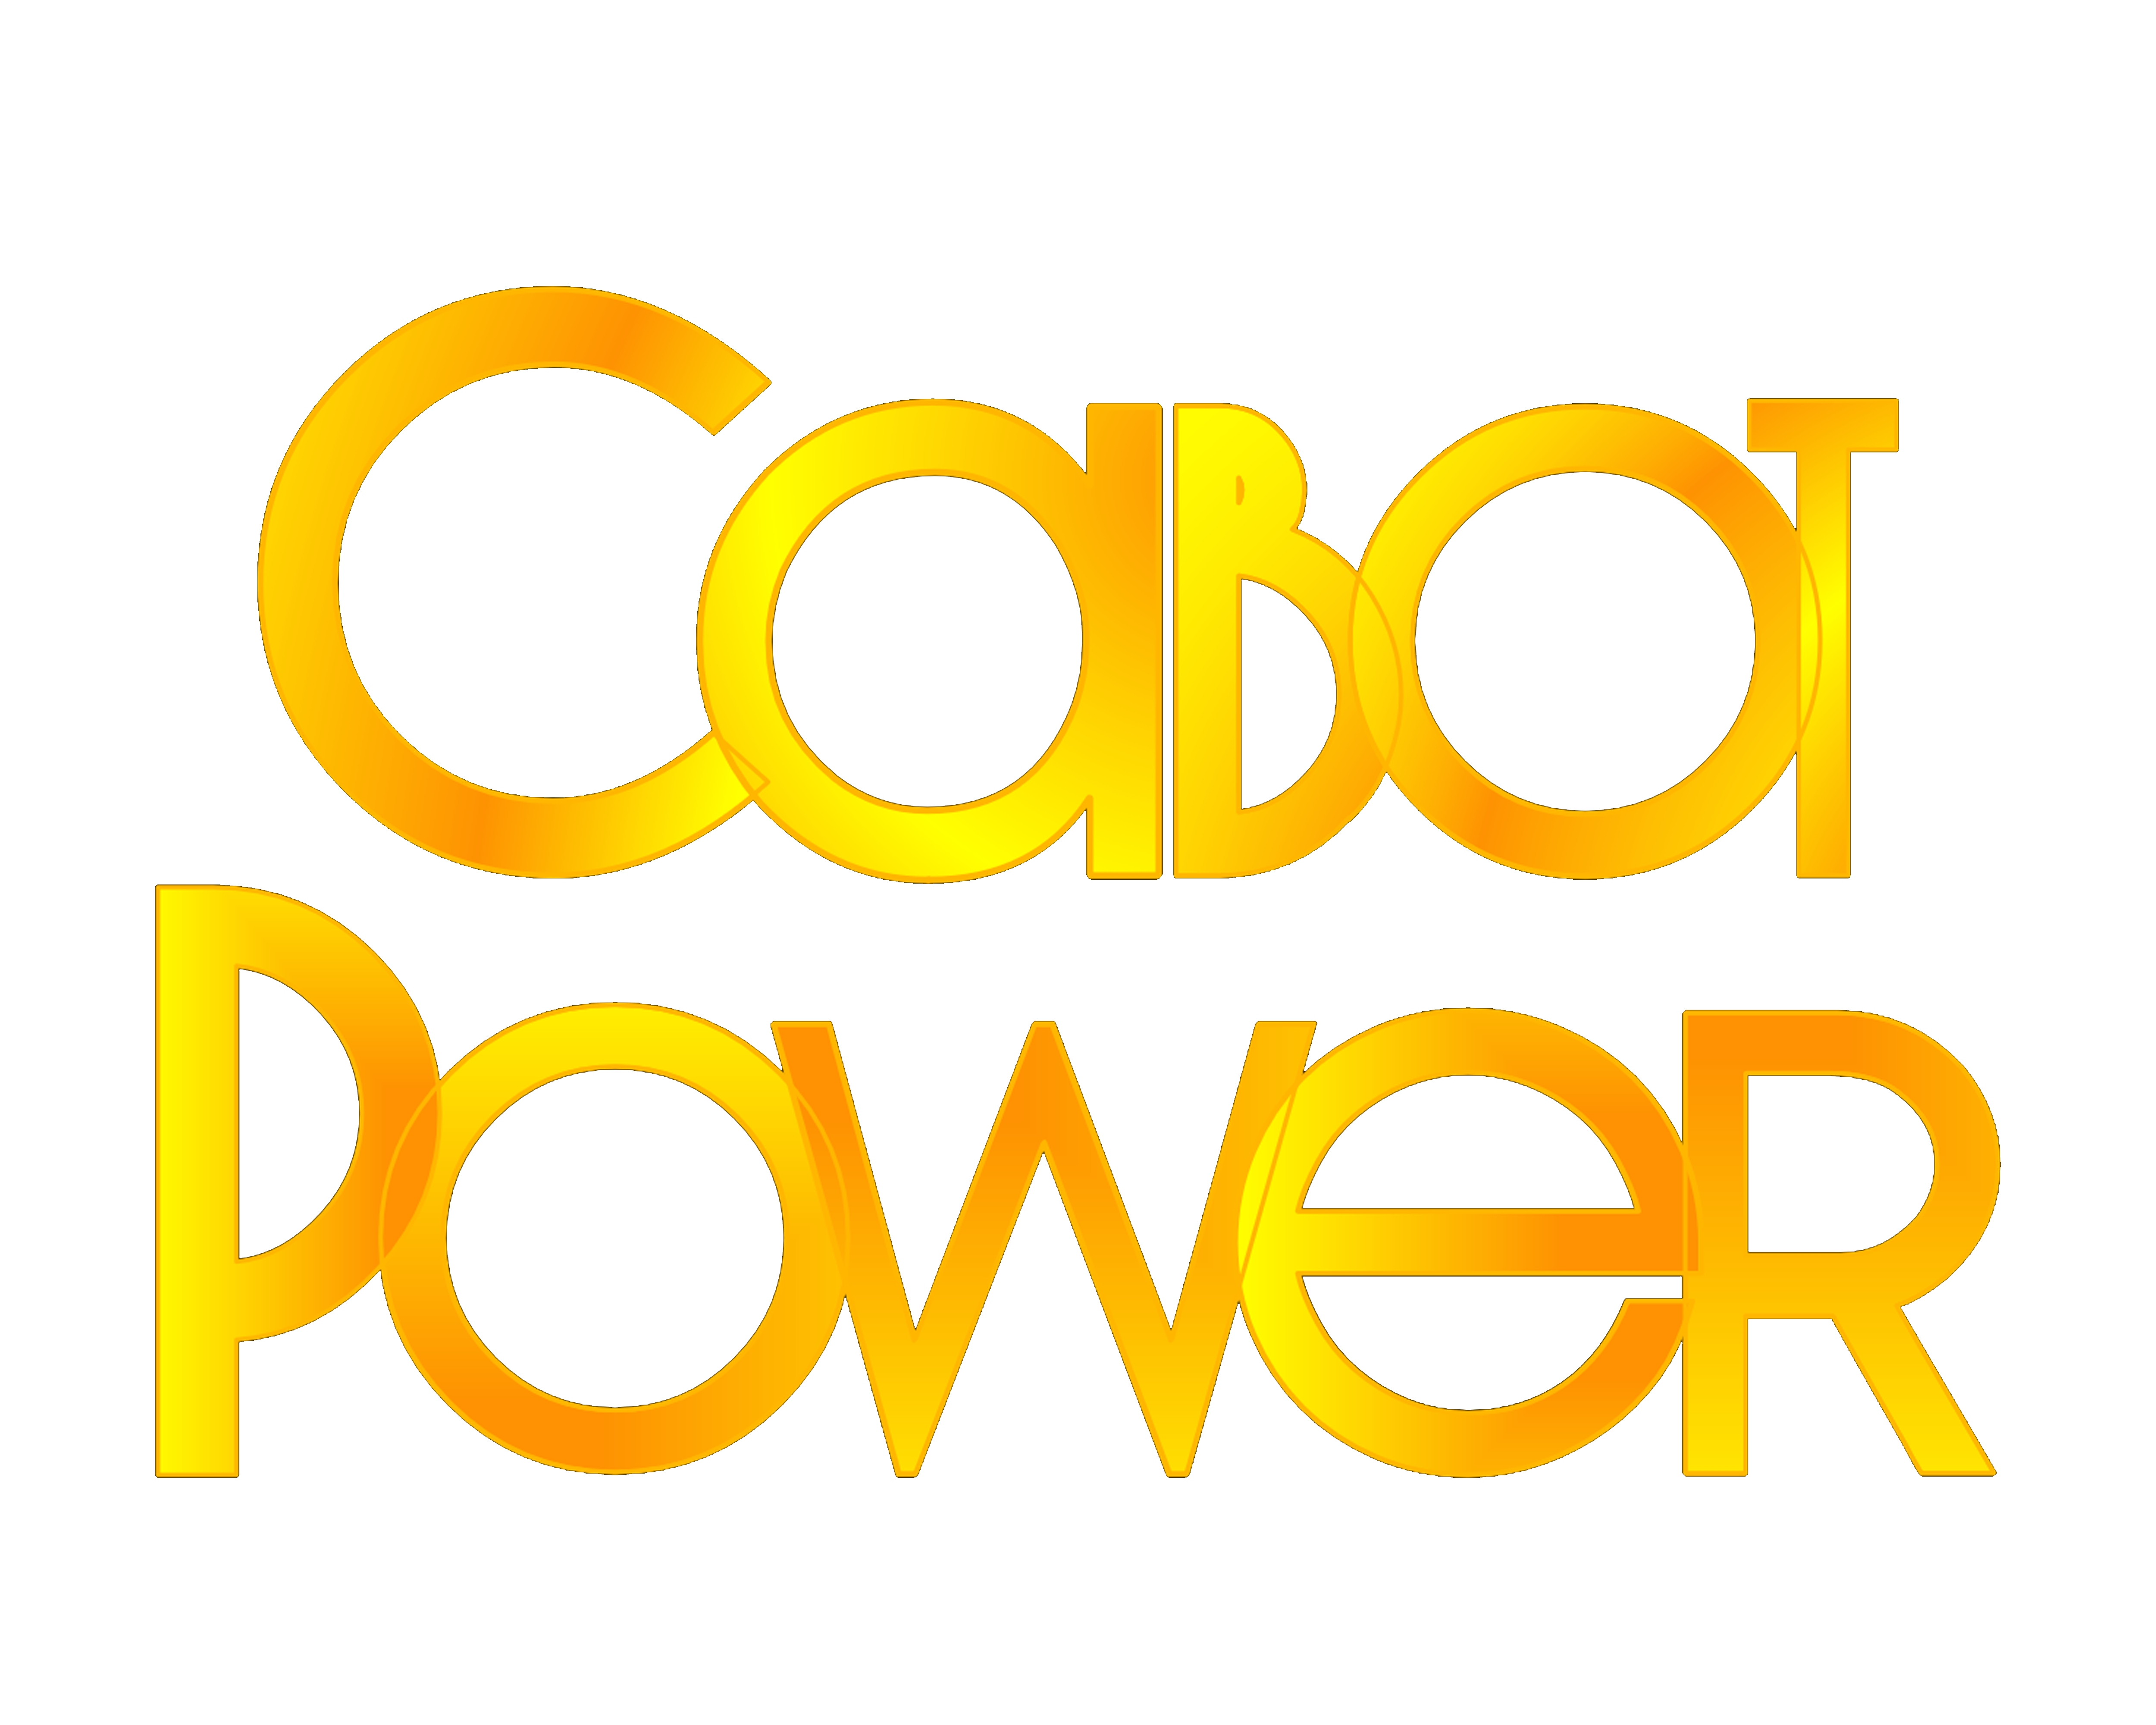 Cabot Power